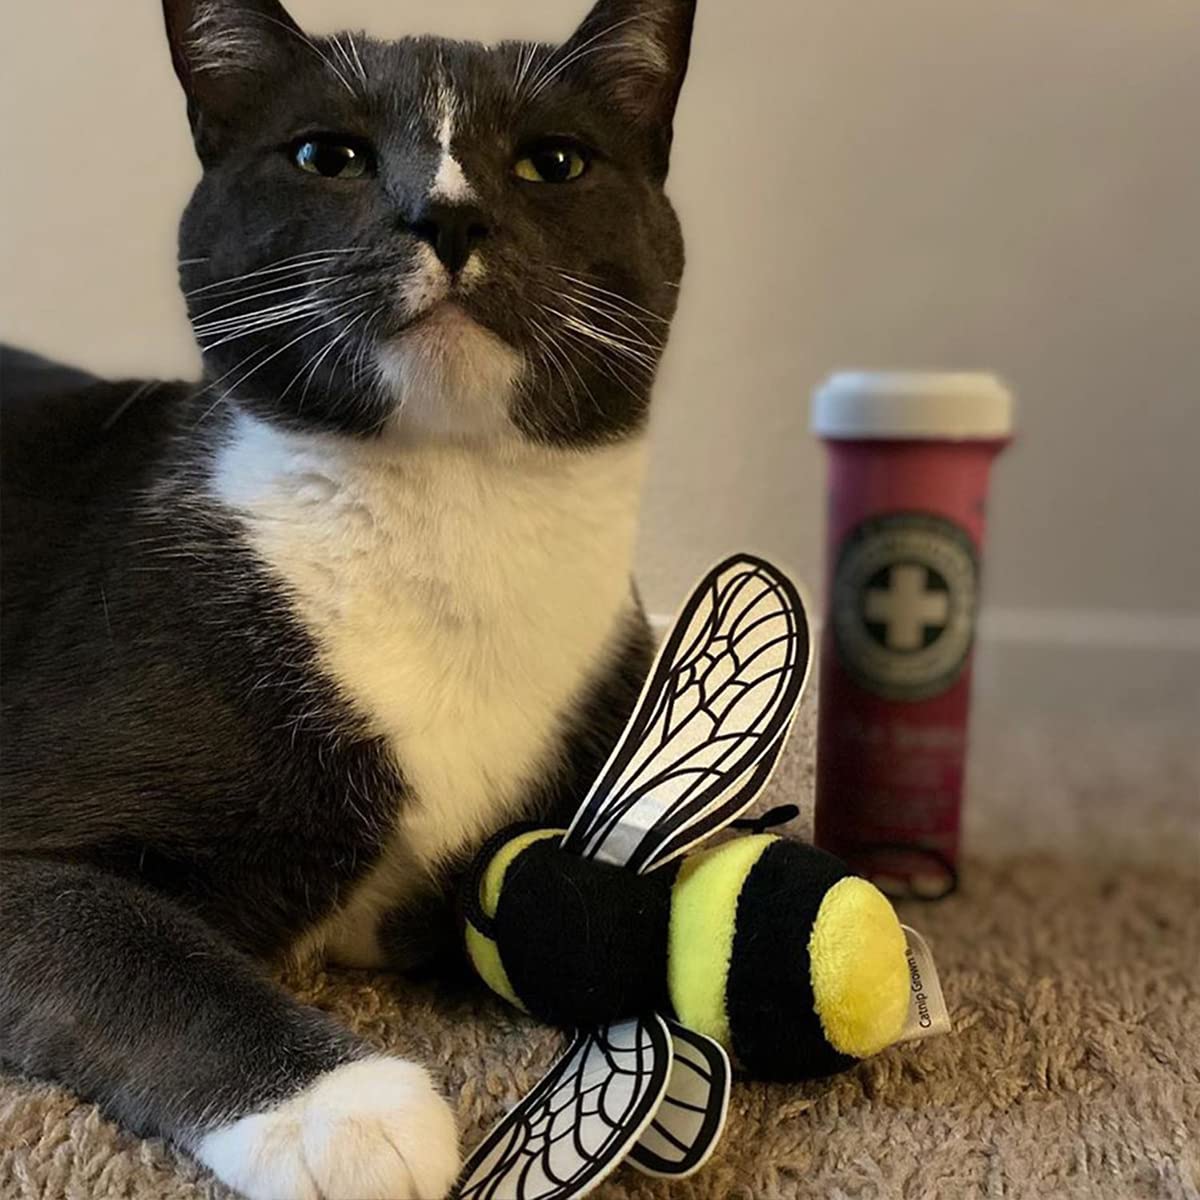 Meowijuana | Honey Bee Bundle | Get Buzzed Refillable Bee Wand Toy and Honeysuckle Haze Catnip Blend | Promotes Play and Cat Health | Includes Organic Catnip